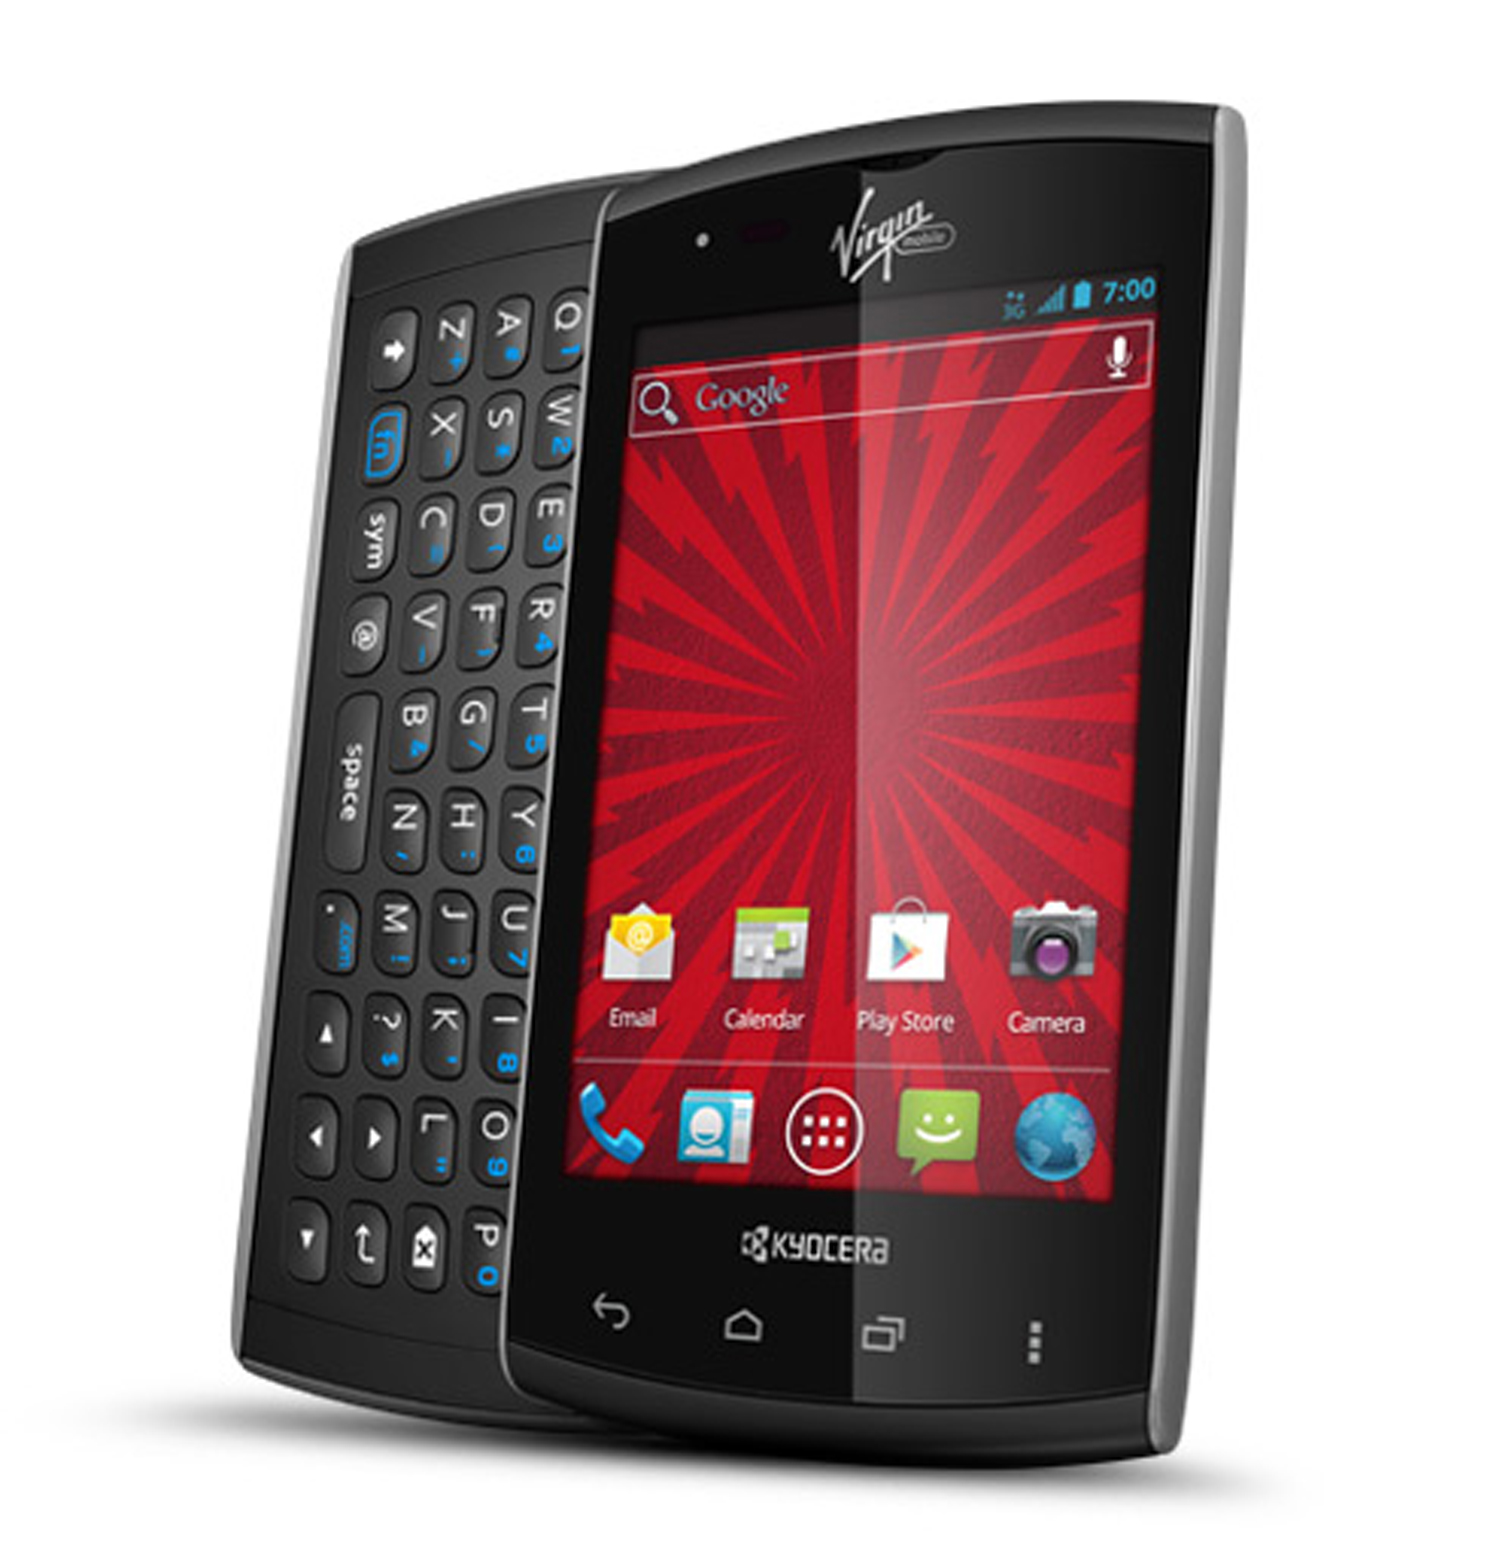 Kyocera Rise Cell Phone - image 1 of 2